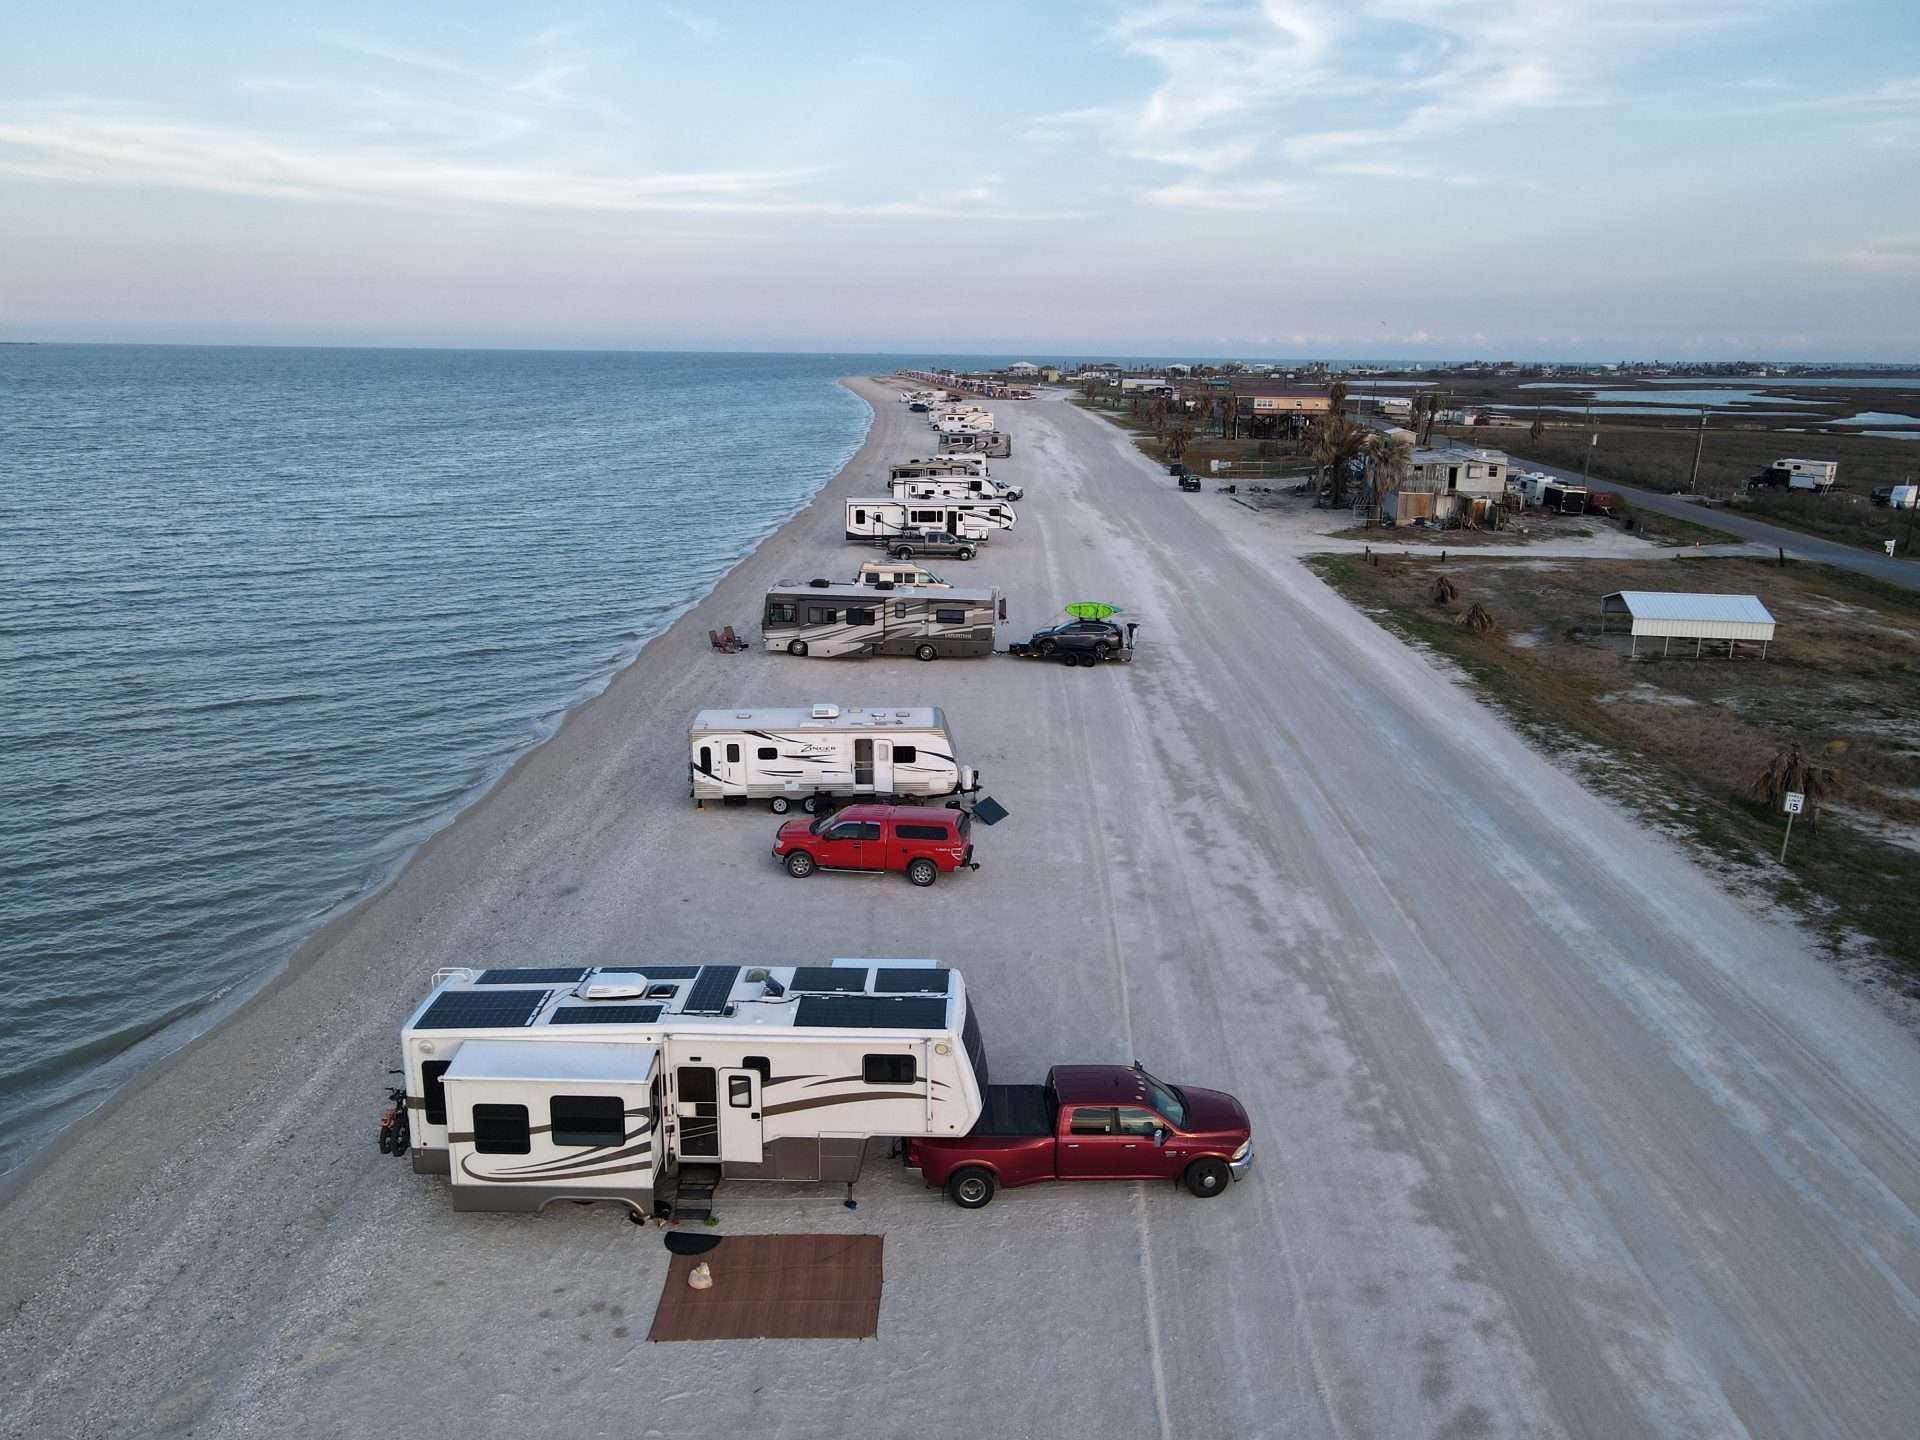 RVs parked at beach campsite in Florida